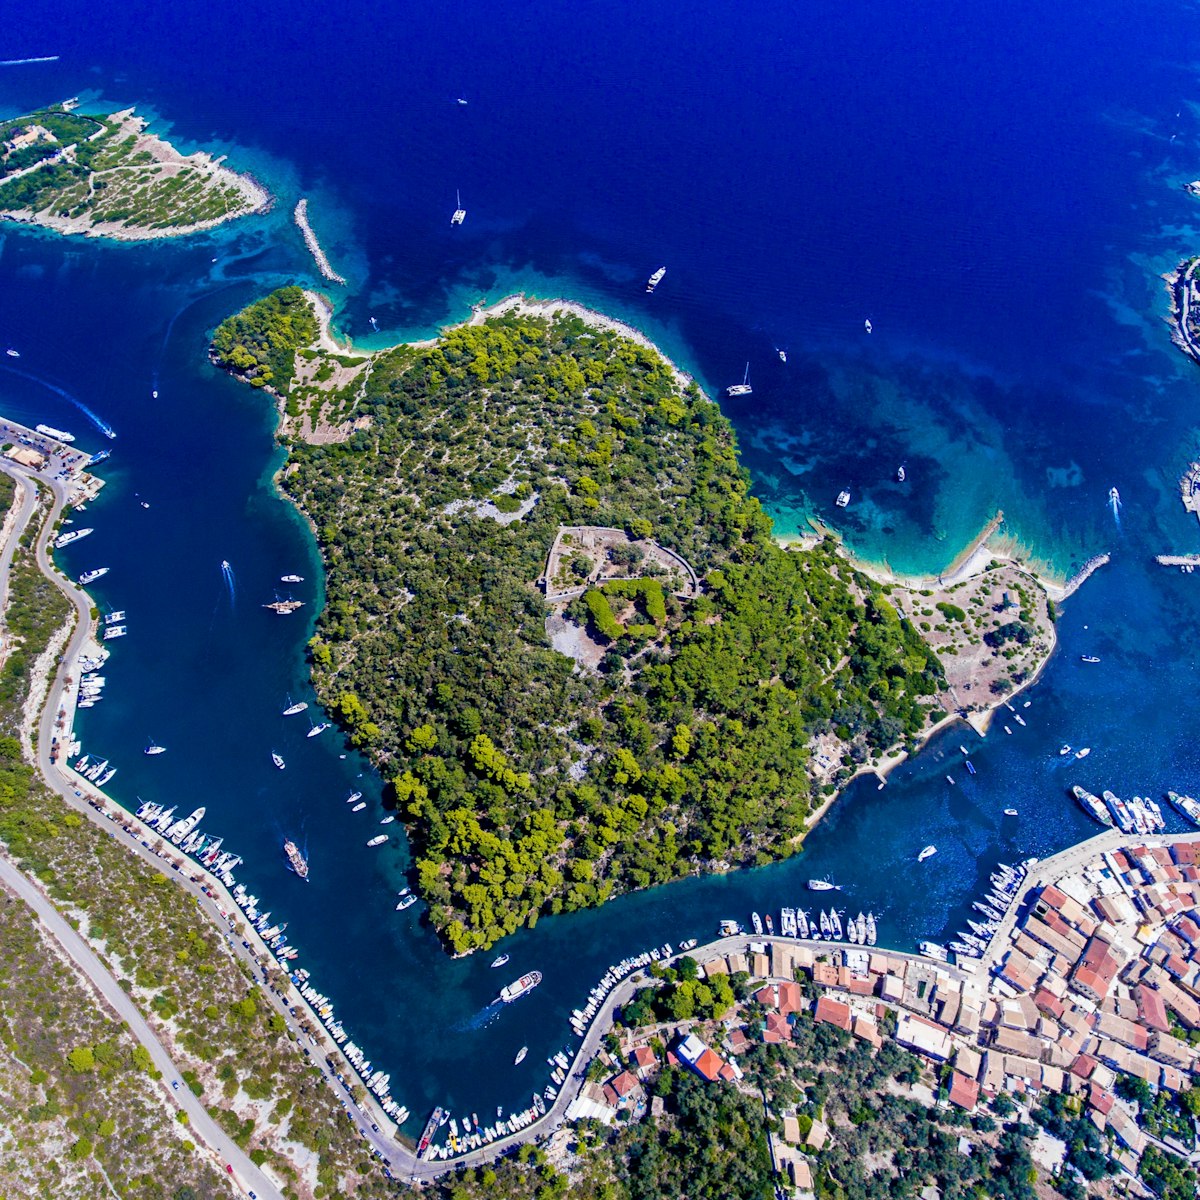 Head to the Ionian Sea's hidden gems from our customers' top-rated marinas